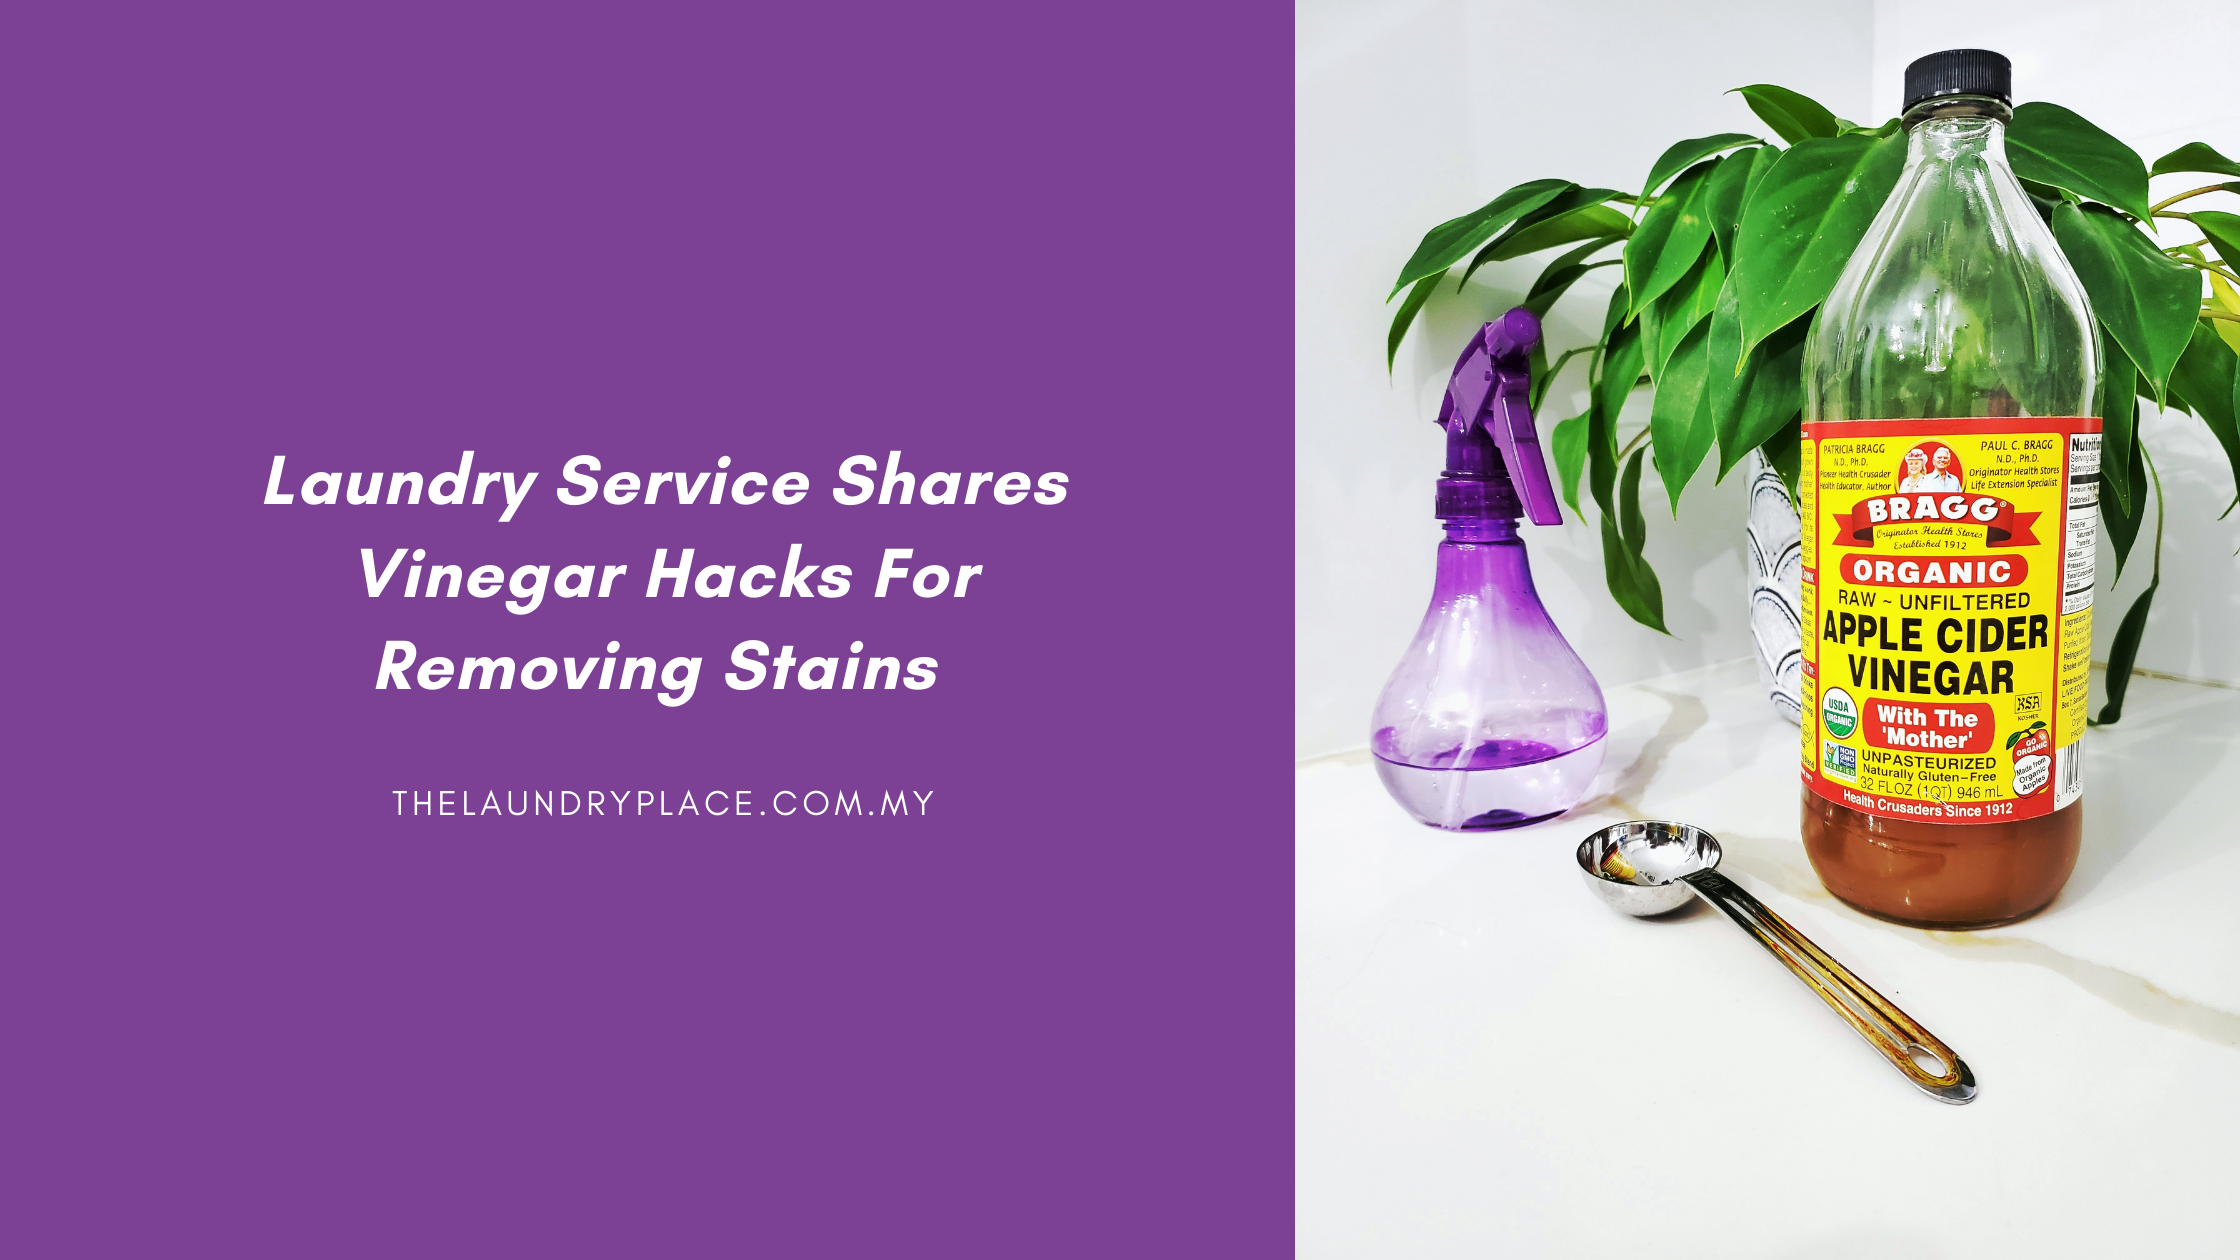 Laundry Service Shares Vinegar Hacks For Removing Stains